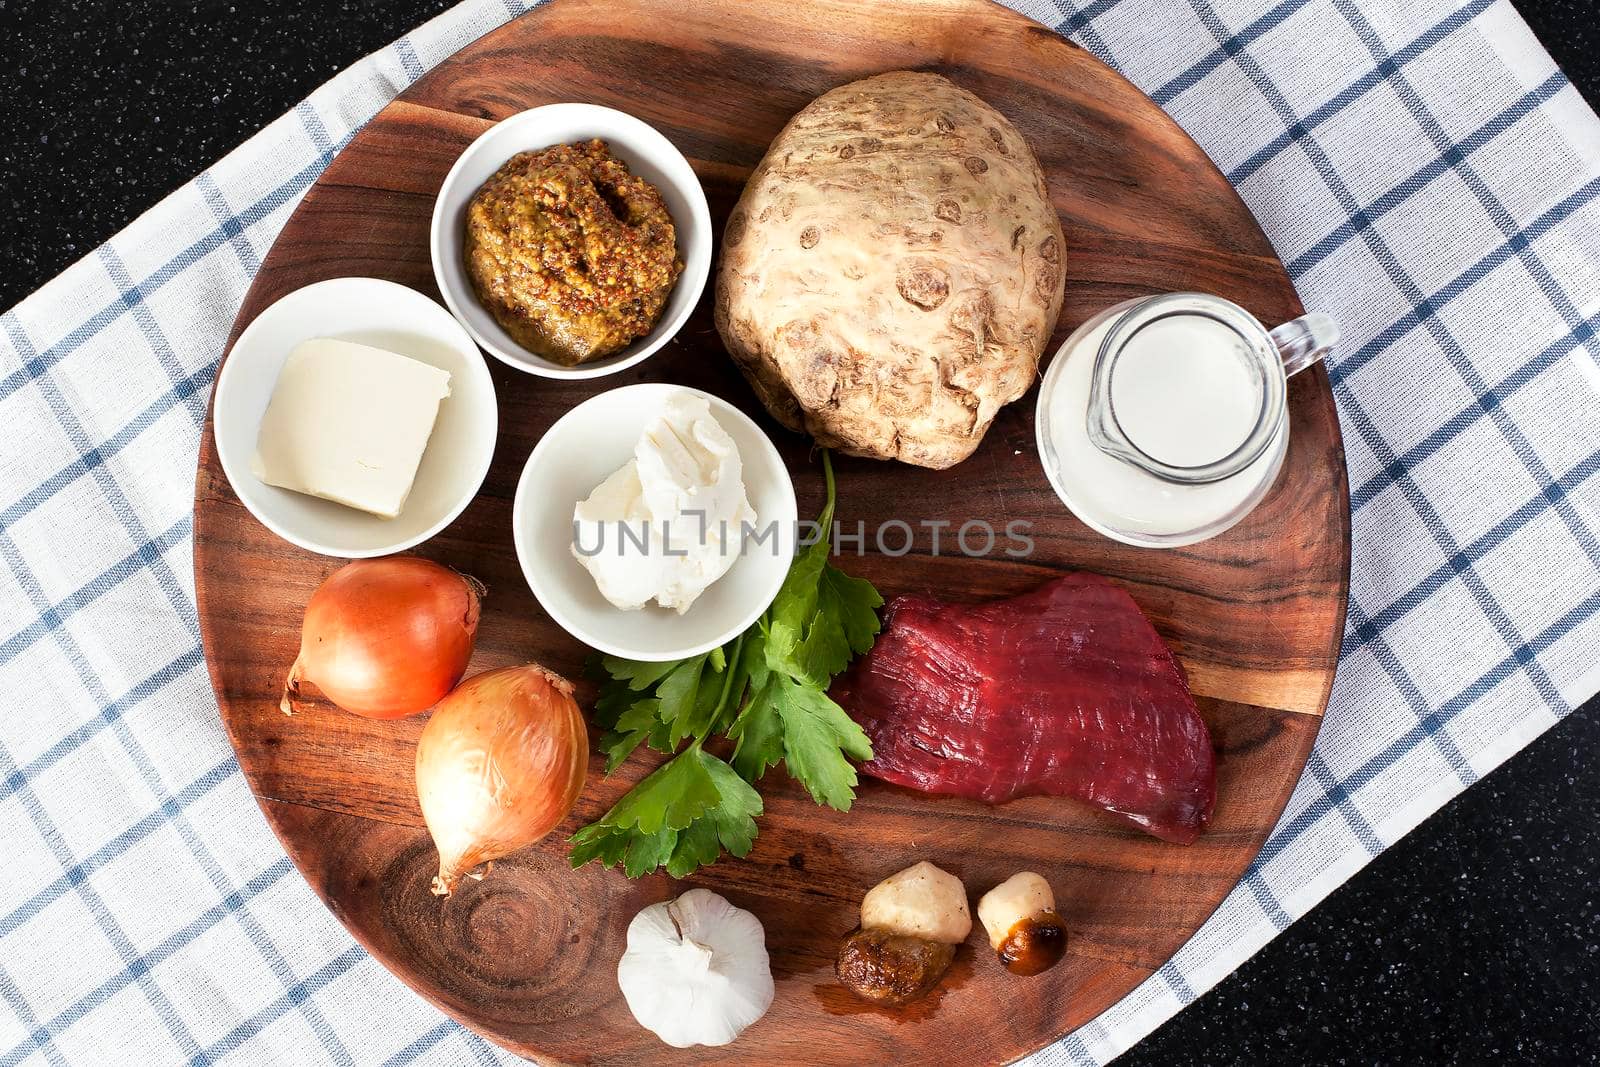 Assorted raw ingredients for Beef Stroganoff with mashed potatoes or celery. Top view - Stock image